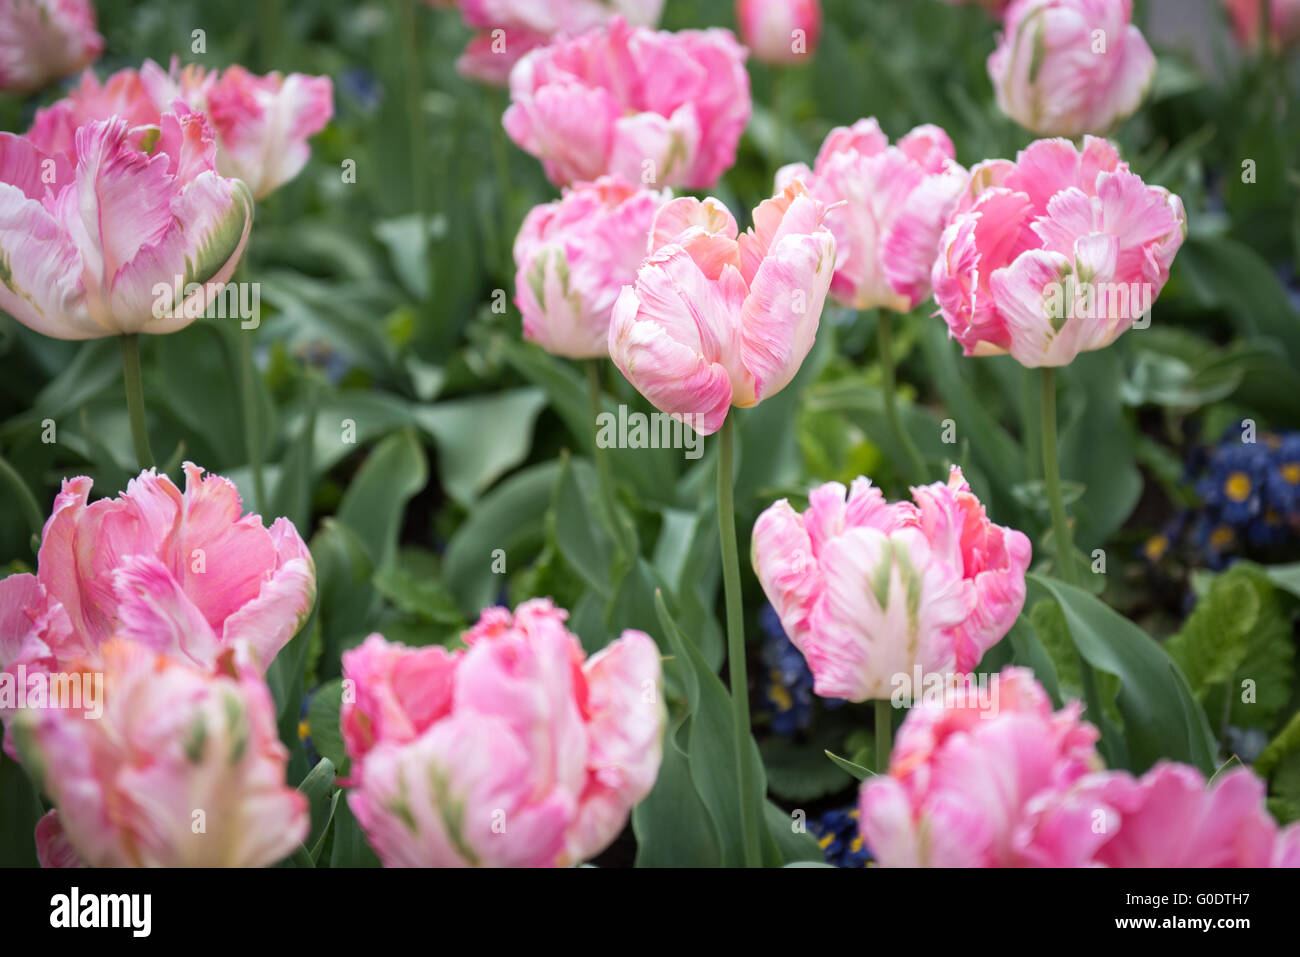 Apricot Parrot tulipa tulips with feathered, curled, twisted, waved petals at Kew Botanical Garden in London, UK Stock Photo